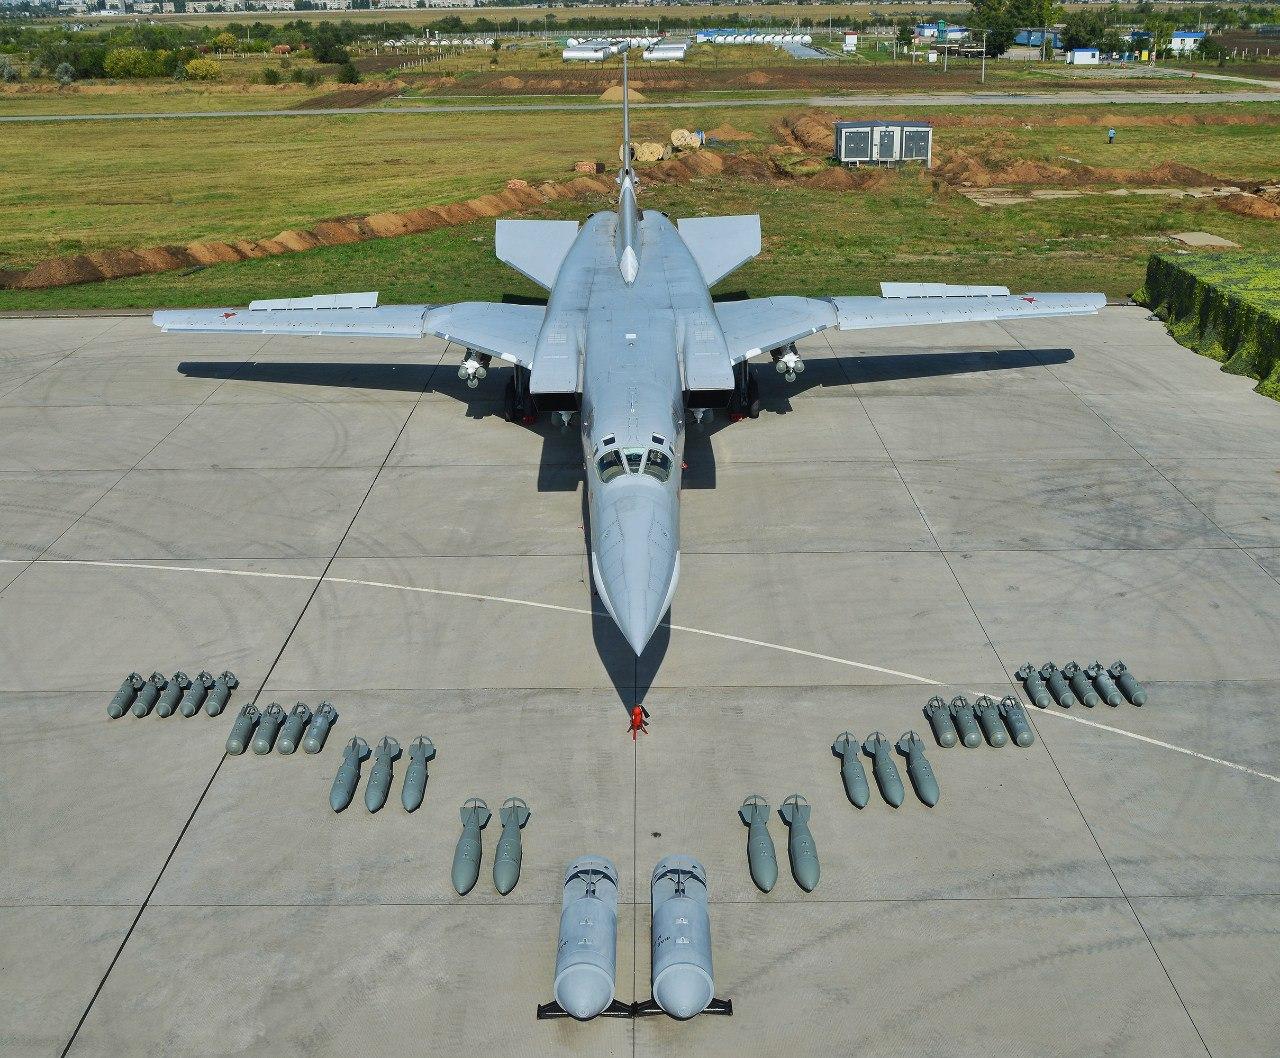 Tu-22M3 and its arsenal of free-falling bombs / Defense Express / Indeed, Georgia in 2008 Took Down a Tu-22M3 as Well but Ukraine's Case is Different